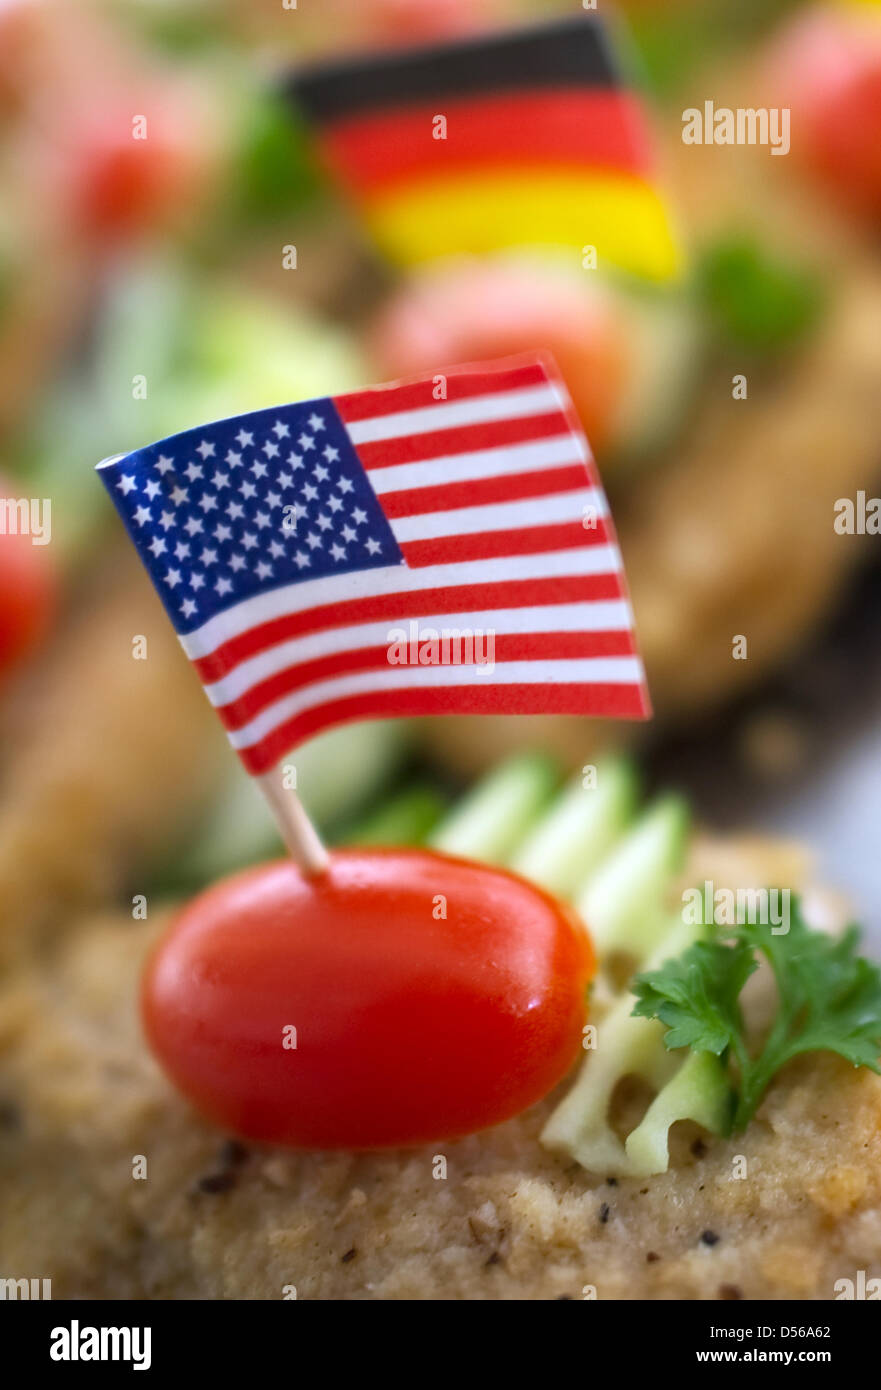 German and American flags stick in fried beef in Muehlberg, Germany, 1 November 2010. Photo: Arno Burgi Stock Photo